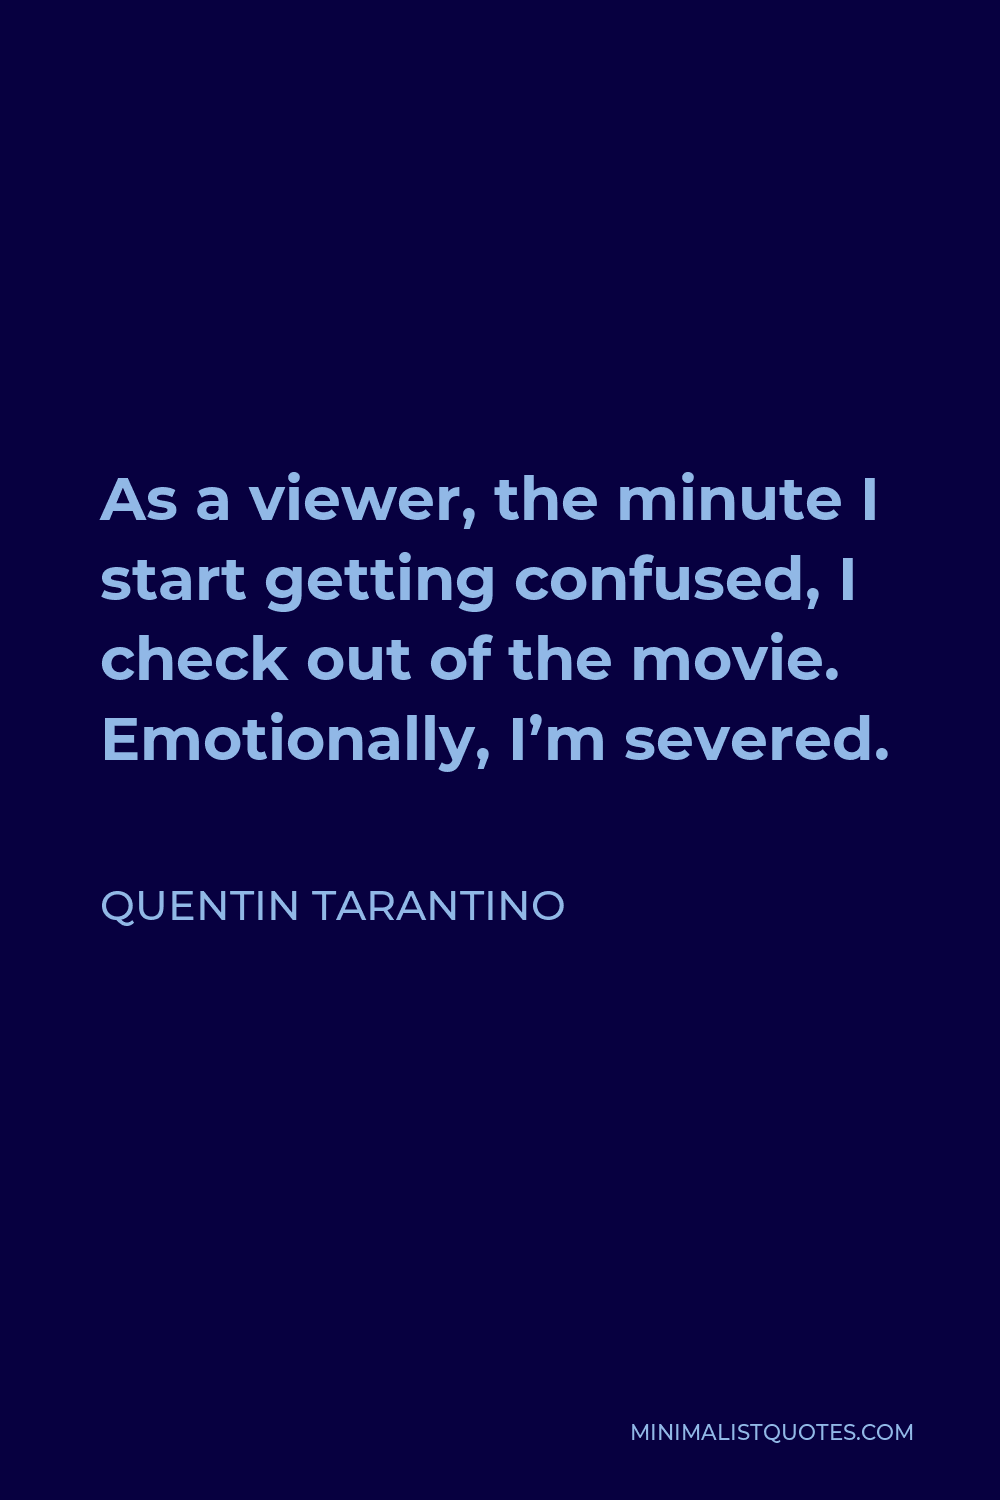 Quentin Tarantino Quote - As a viewer, the minute I start getting confused, I check out of the movie. Emotionally, I’m severed.